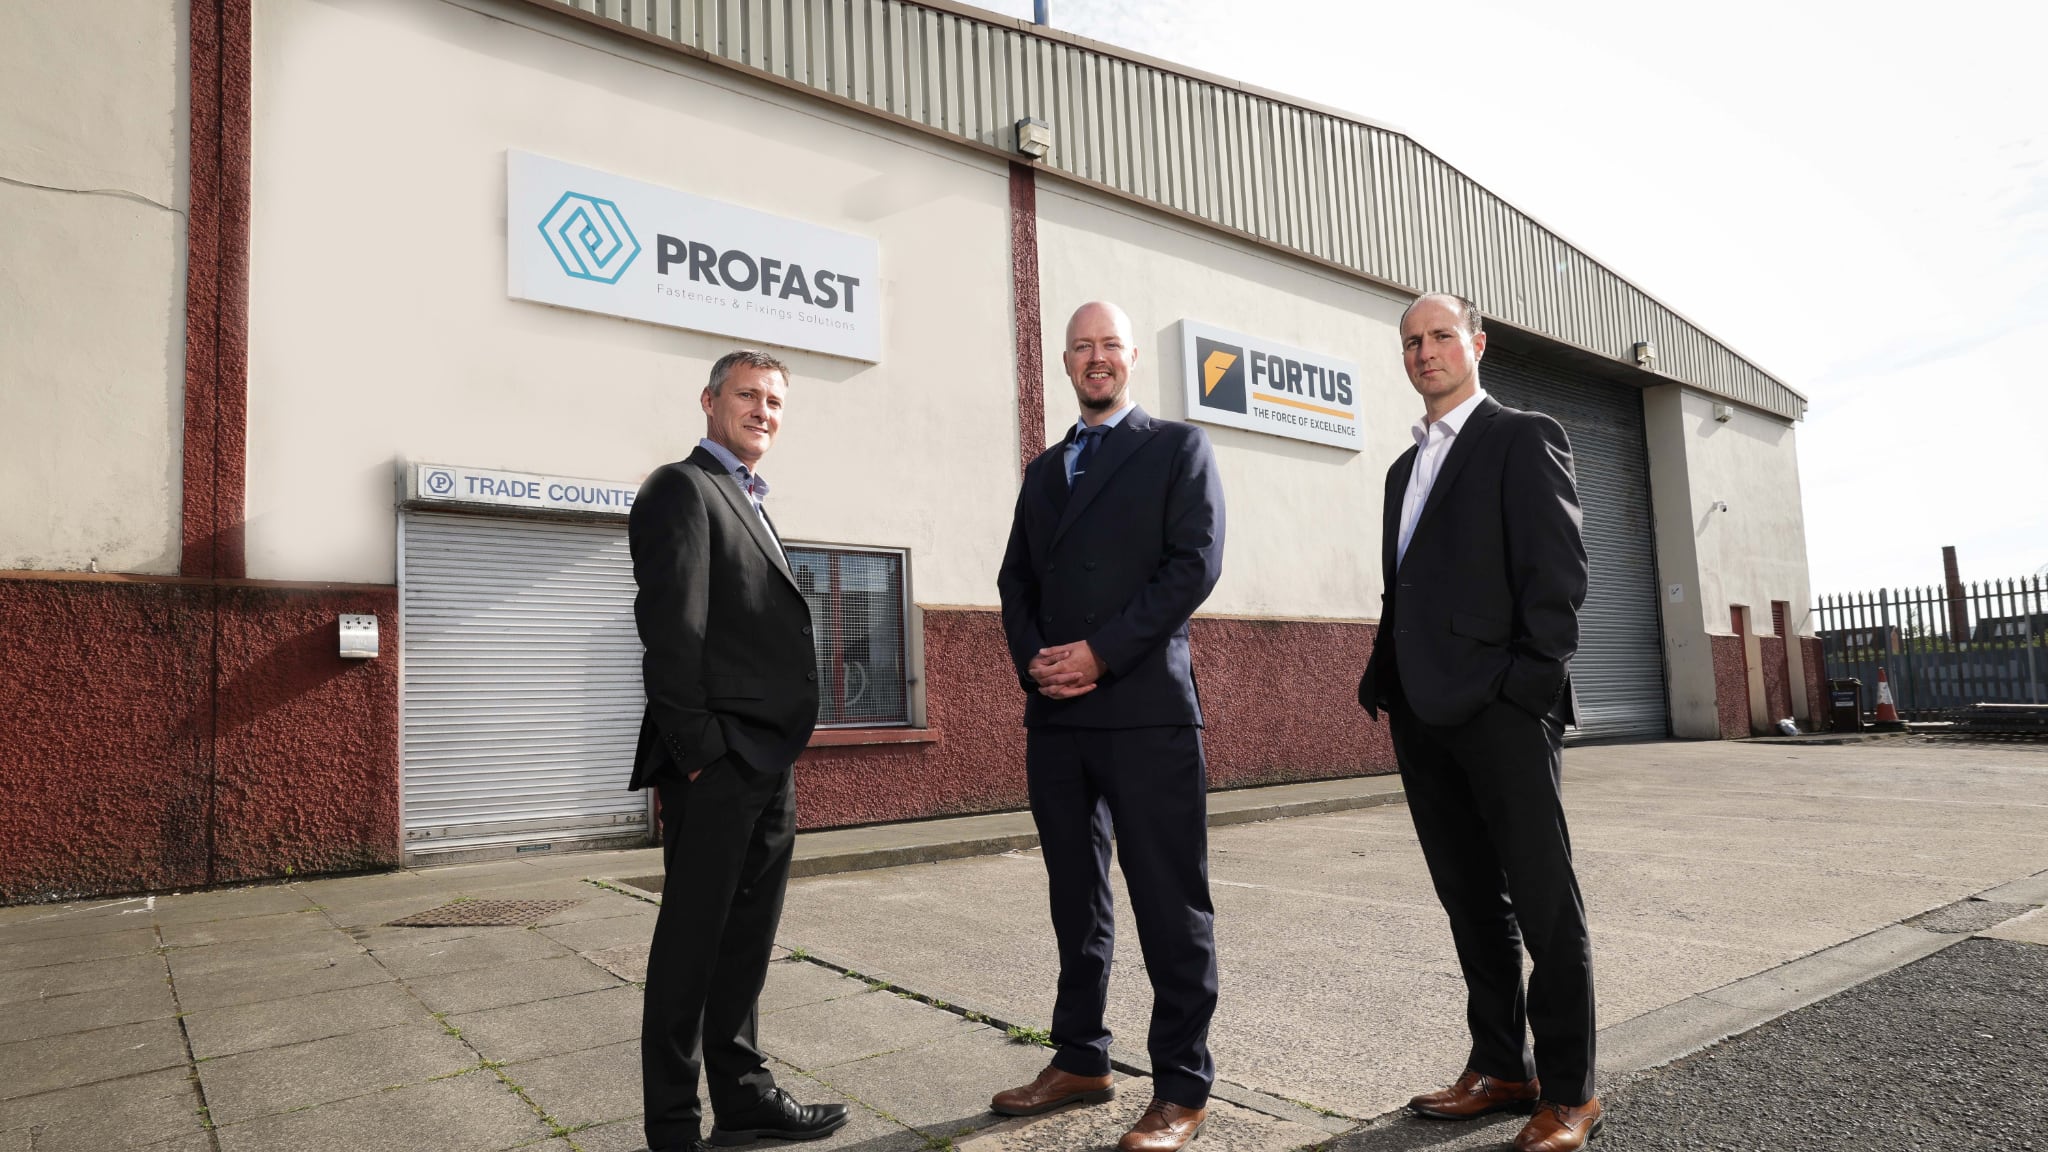 Profast Group in Belfast, which supplies fasteners, fixings, window and door hardware to the construction and manufacturing sectors in Ireland and the UK, has been successfully acquired by three of its colleagues